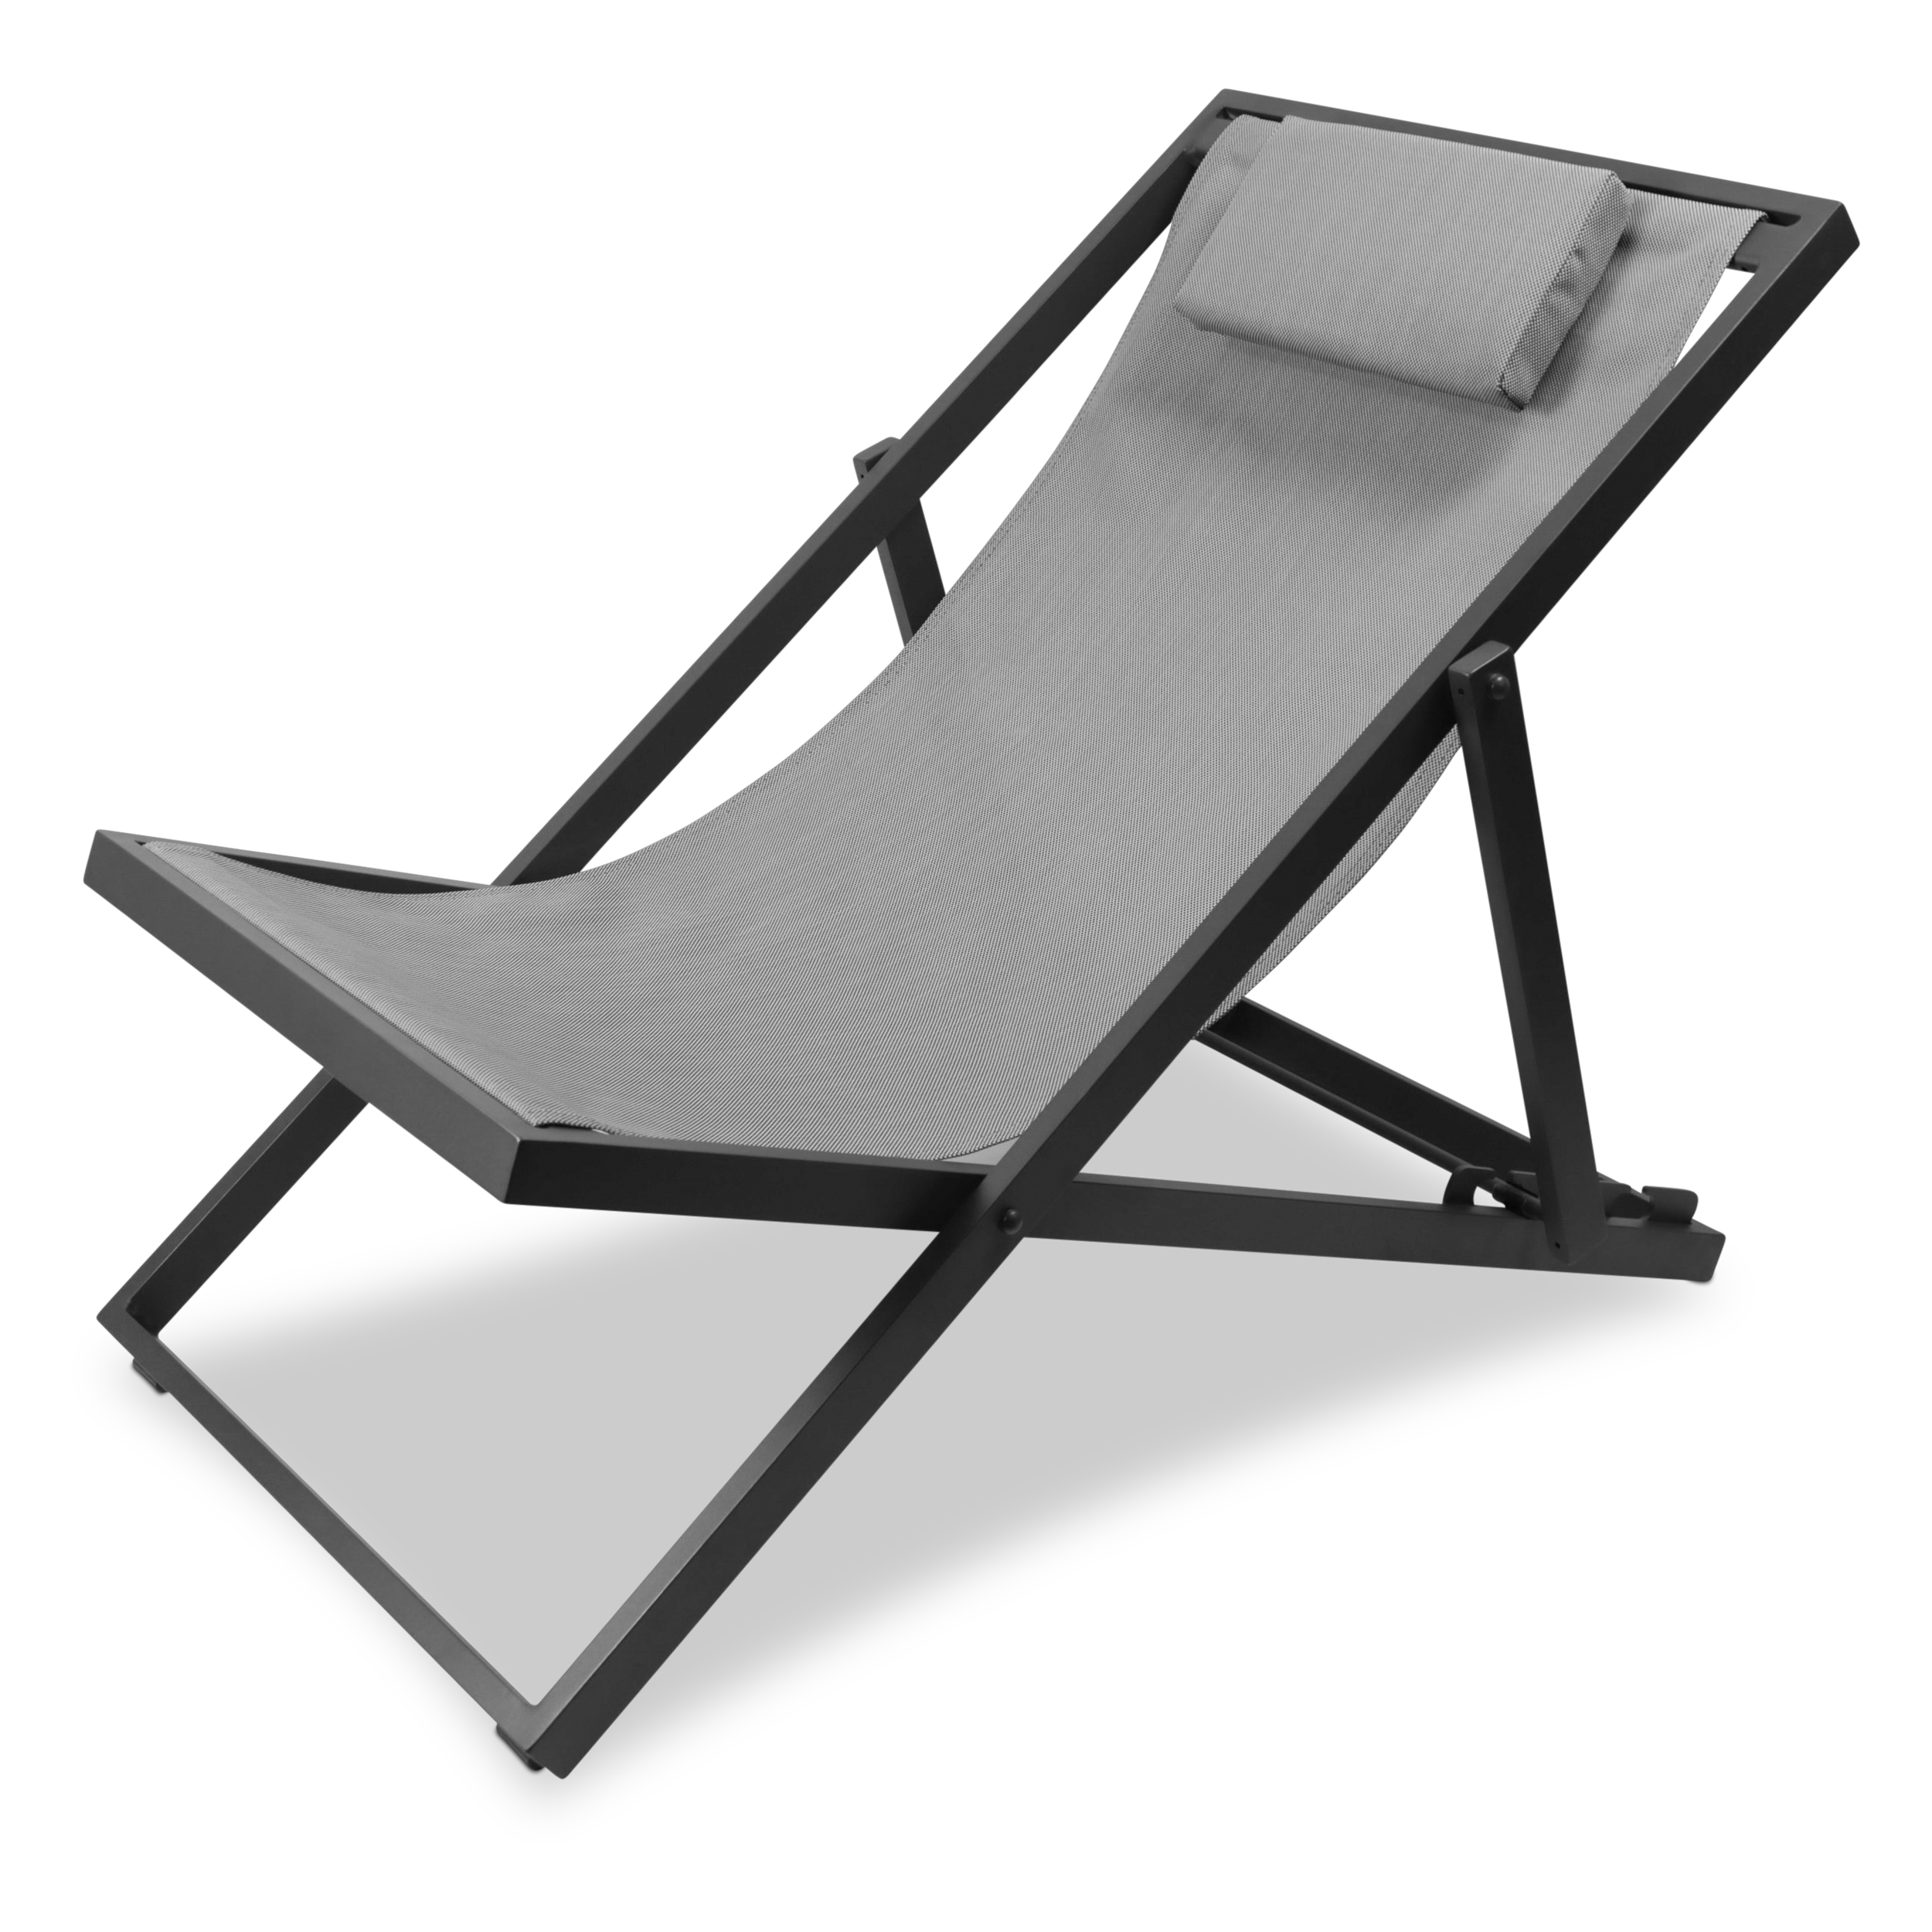 Chill Outdoor Deck Chair in Gunmetal Aluminium Frame and Charcoal Grey Textilene